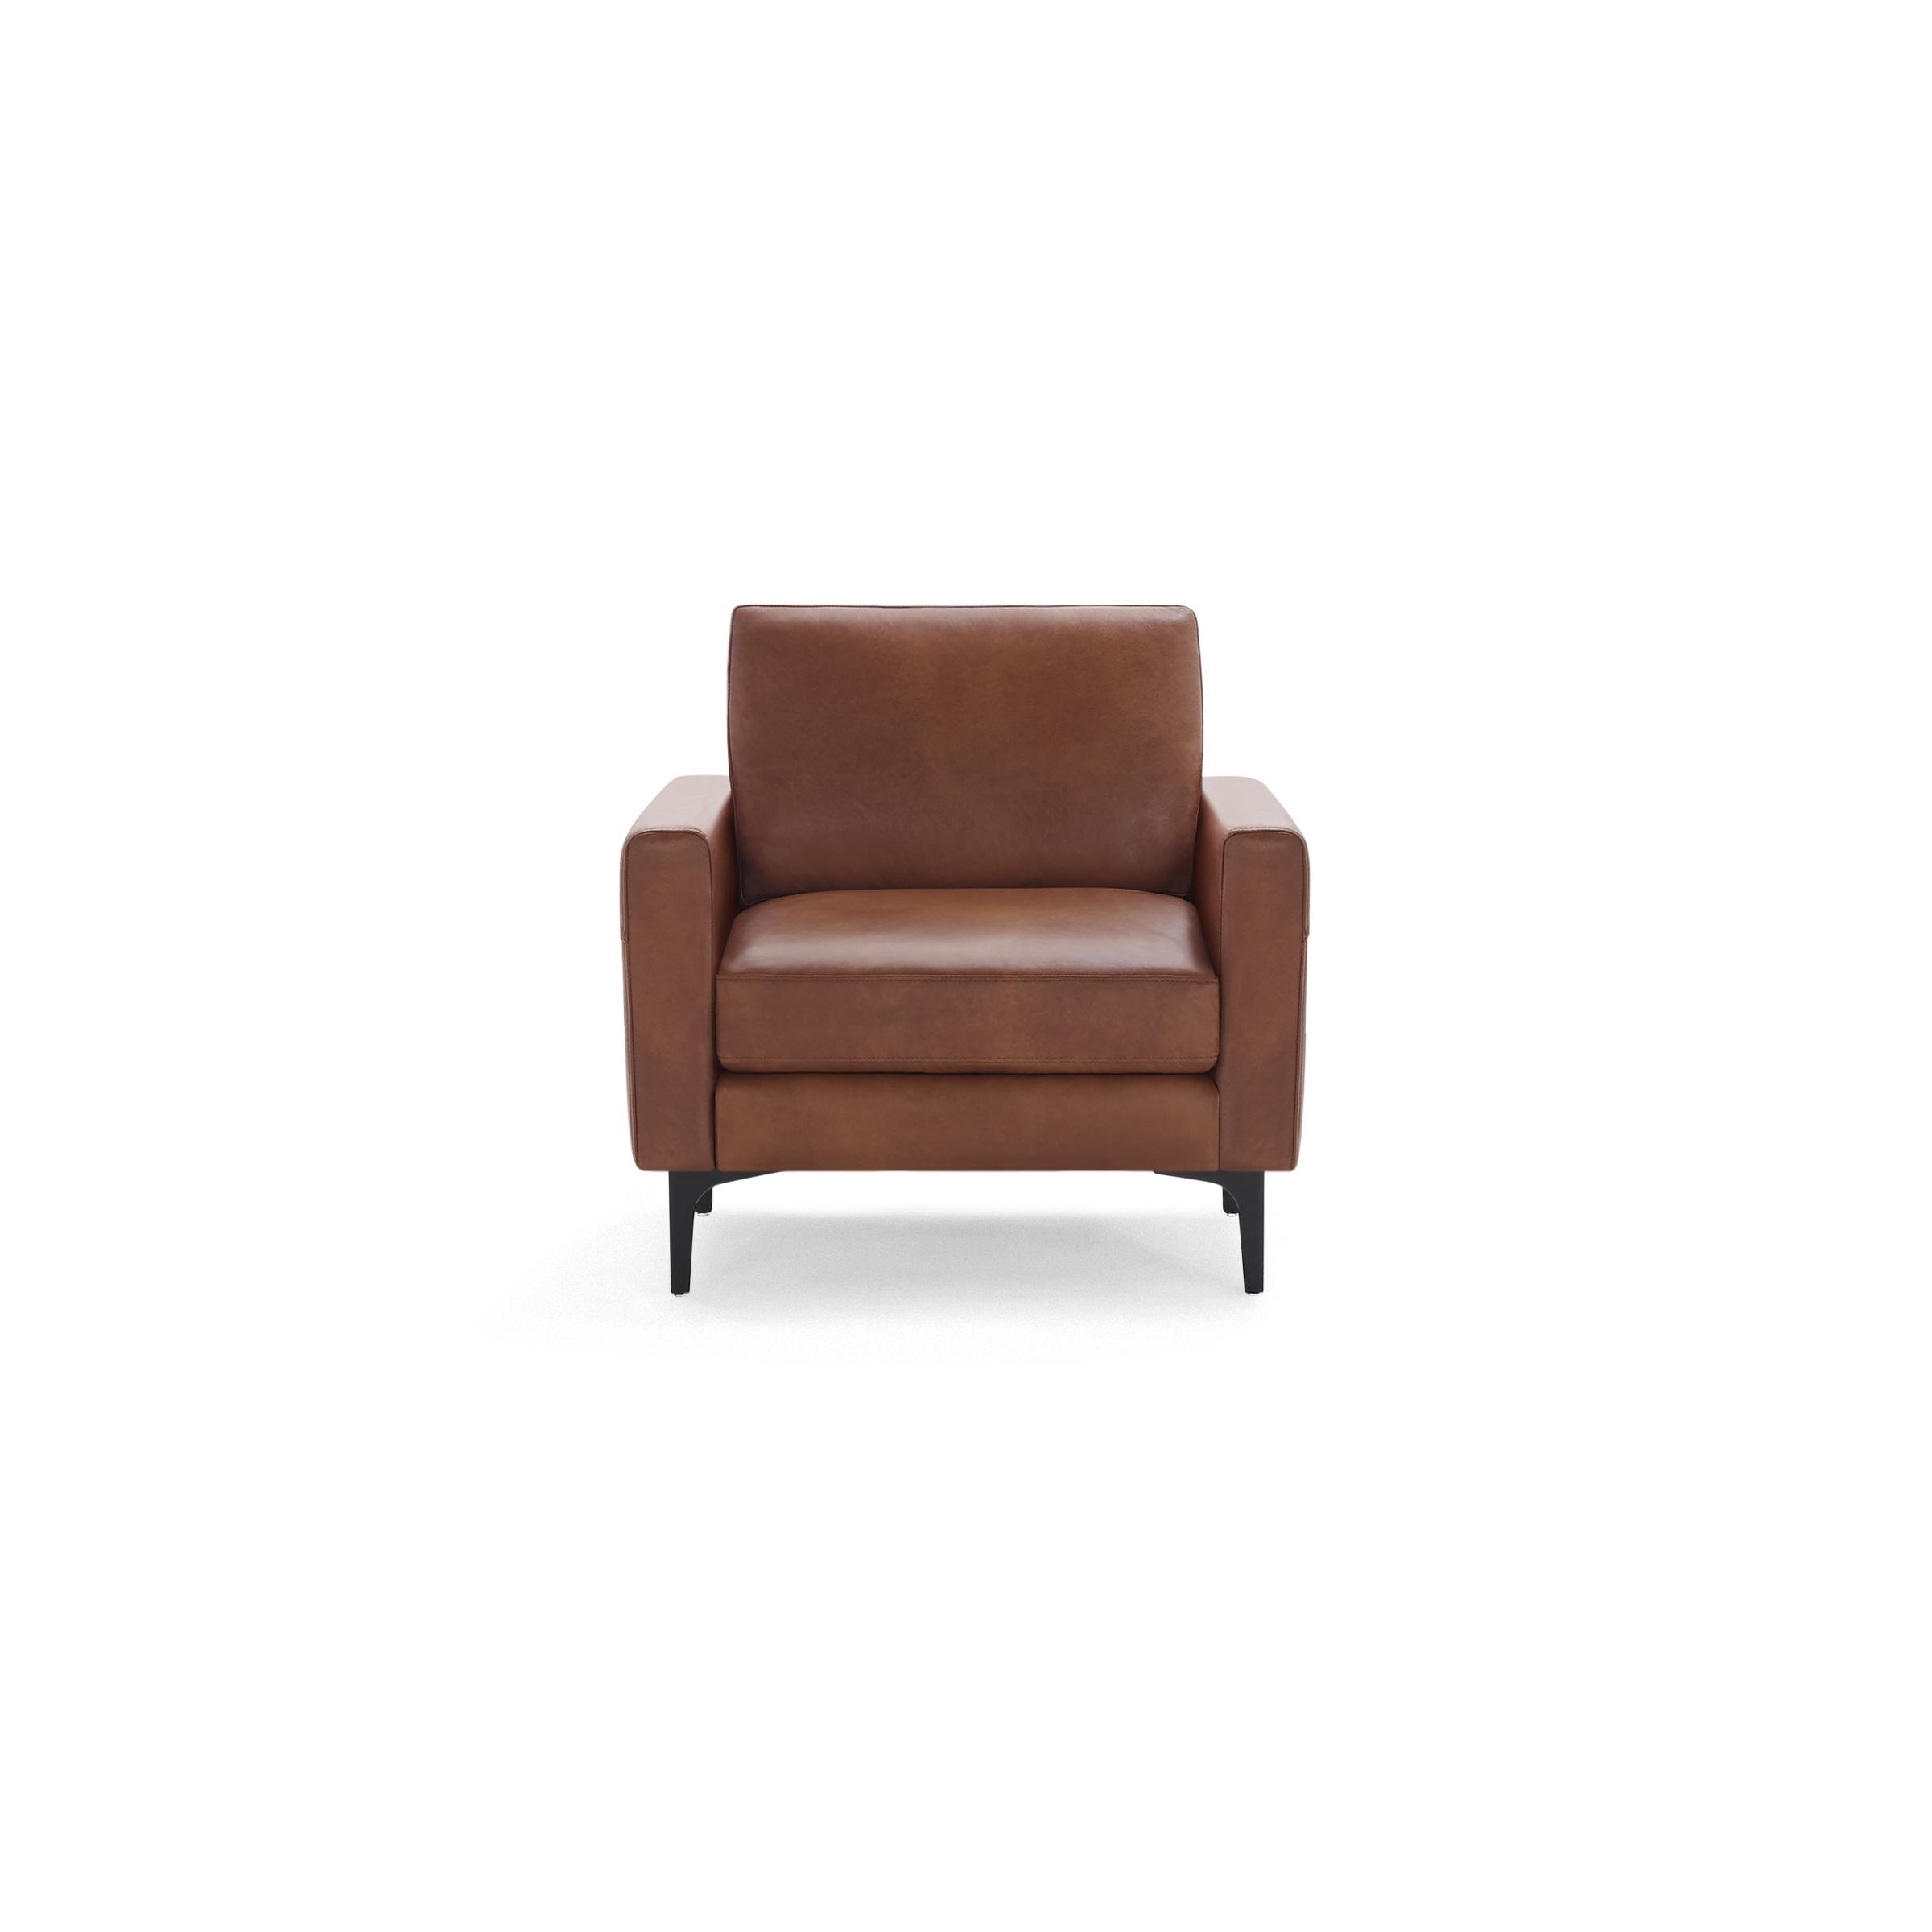 Nomad Leather Club Chair in Chestnut - Image 0